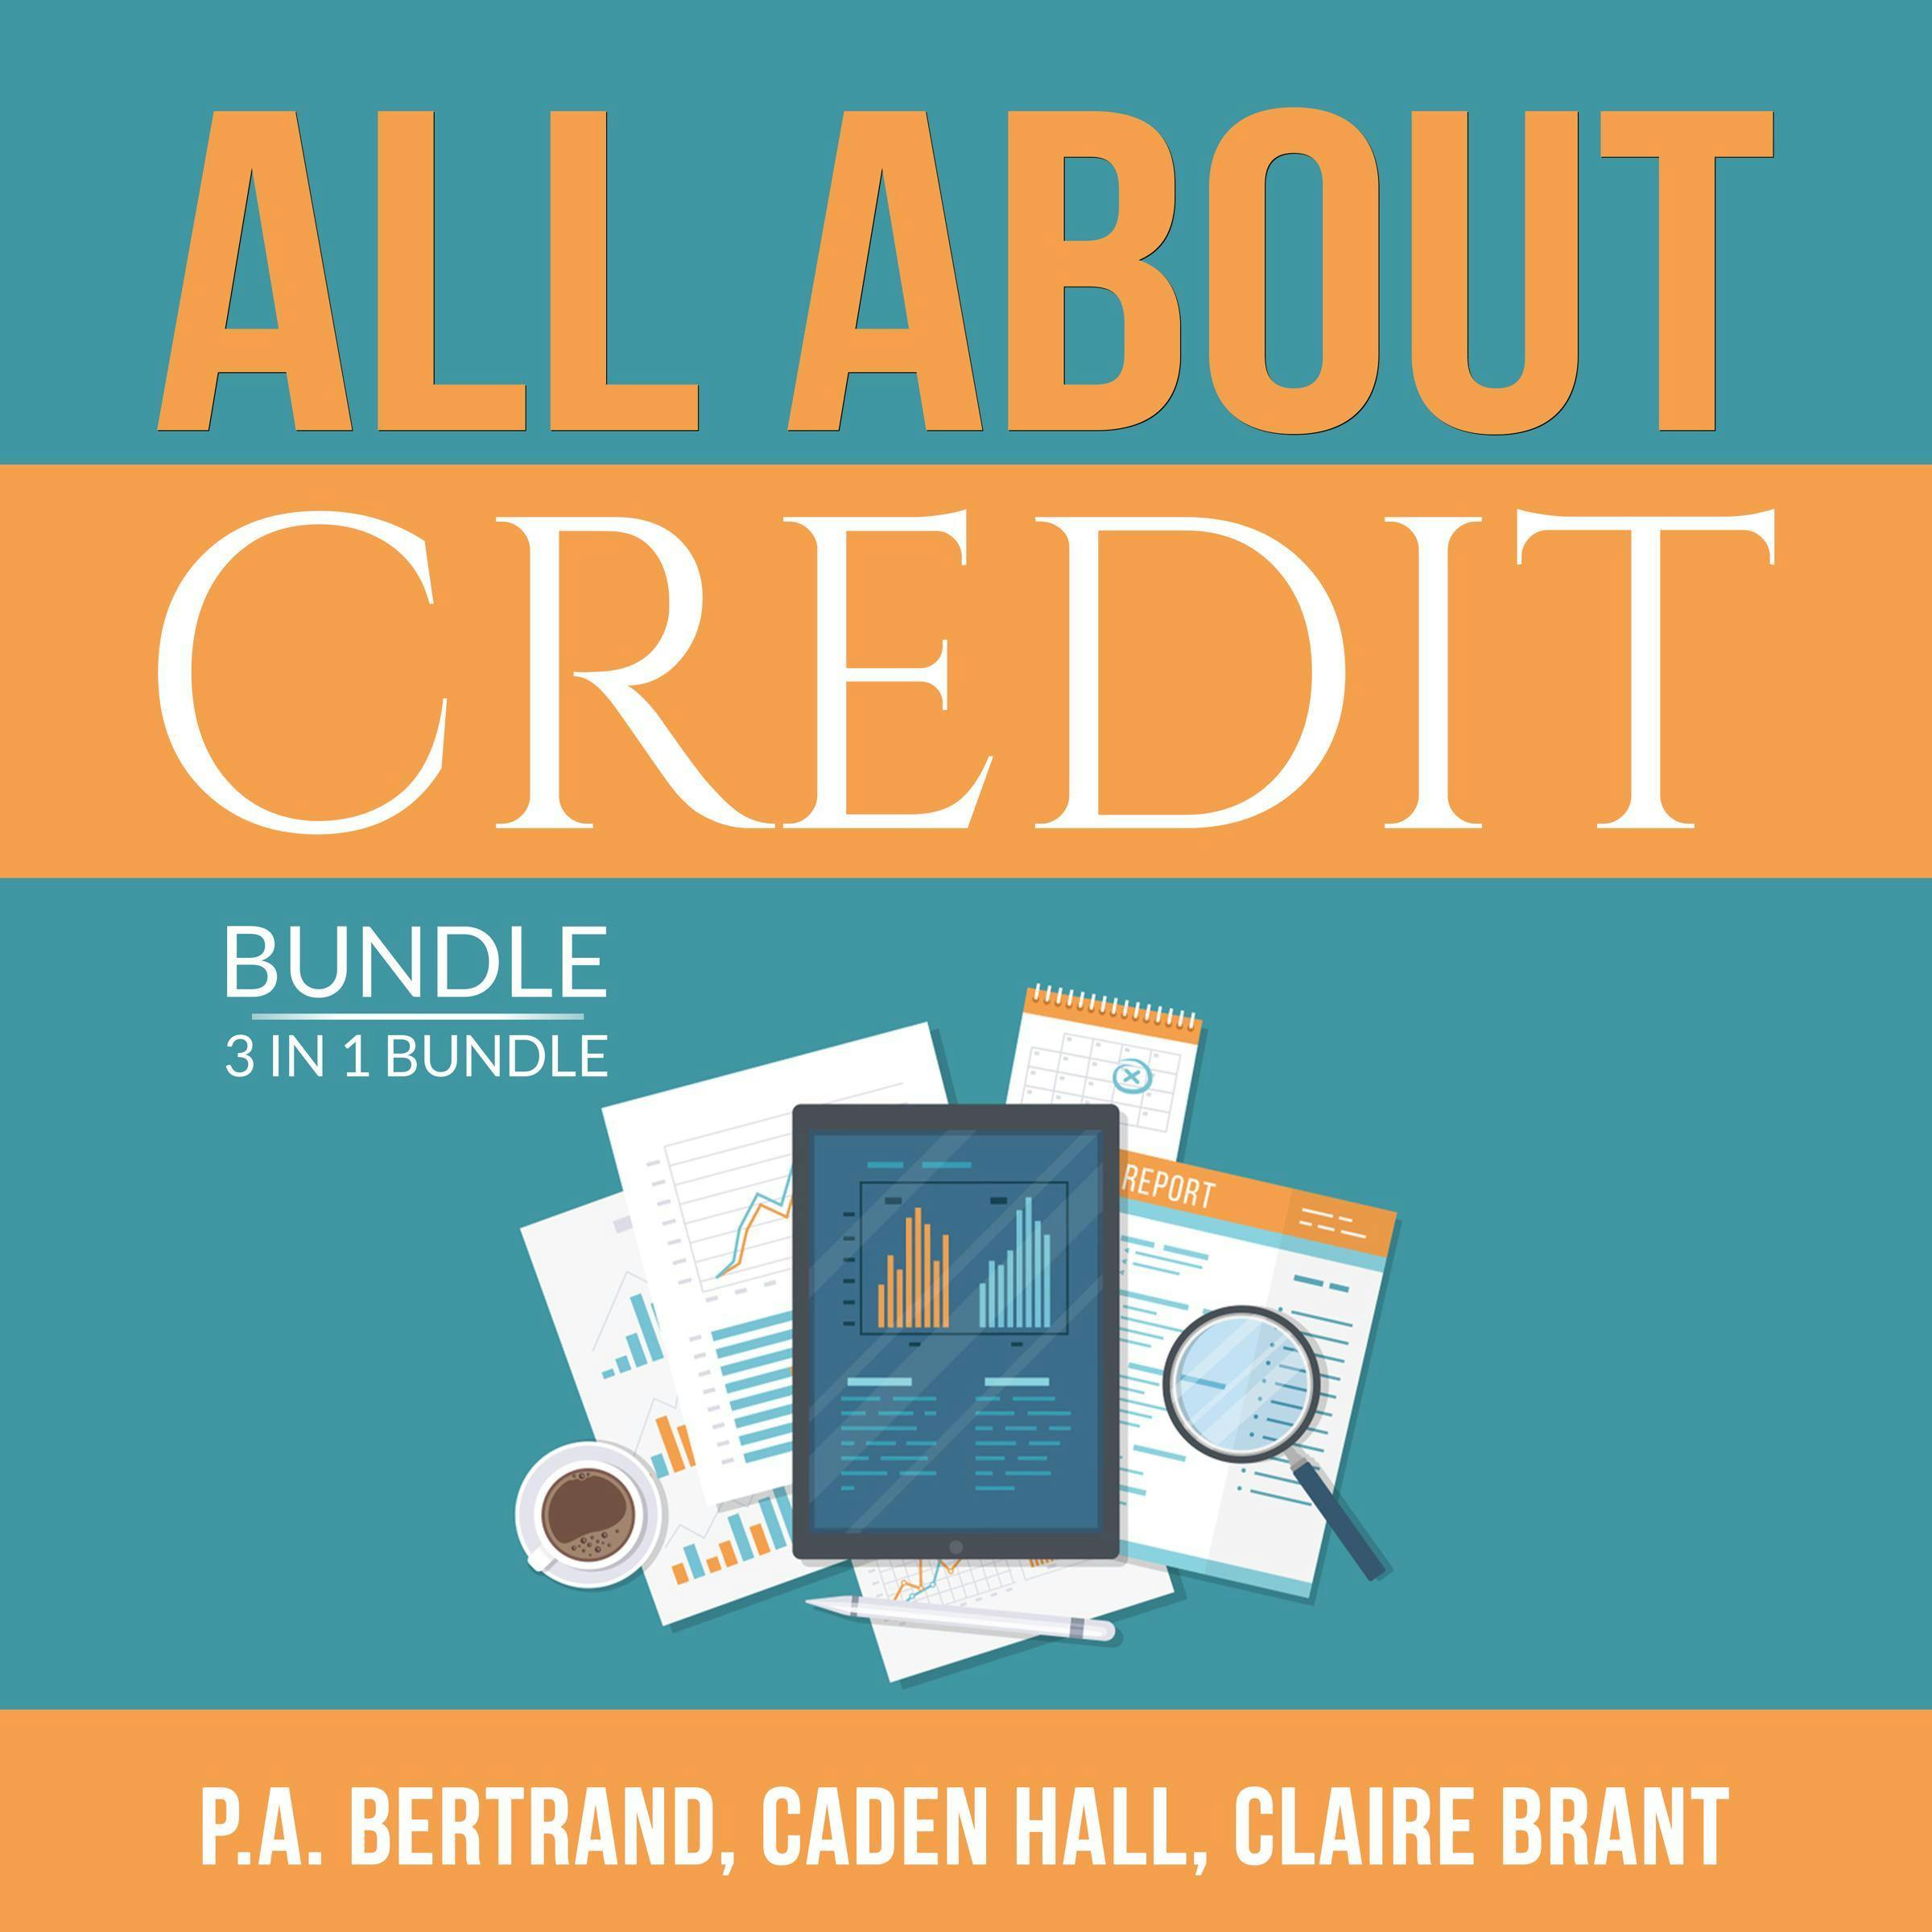 All About Credit Bundle: 3 in 1 Bundle: Understanding Credit, Credit Score and Credit Repair Bible - Caden Hall, Claire Brant, P.A. Bertrand